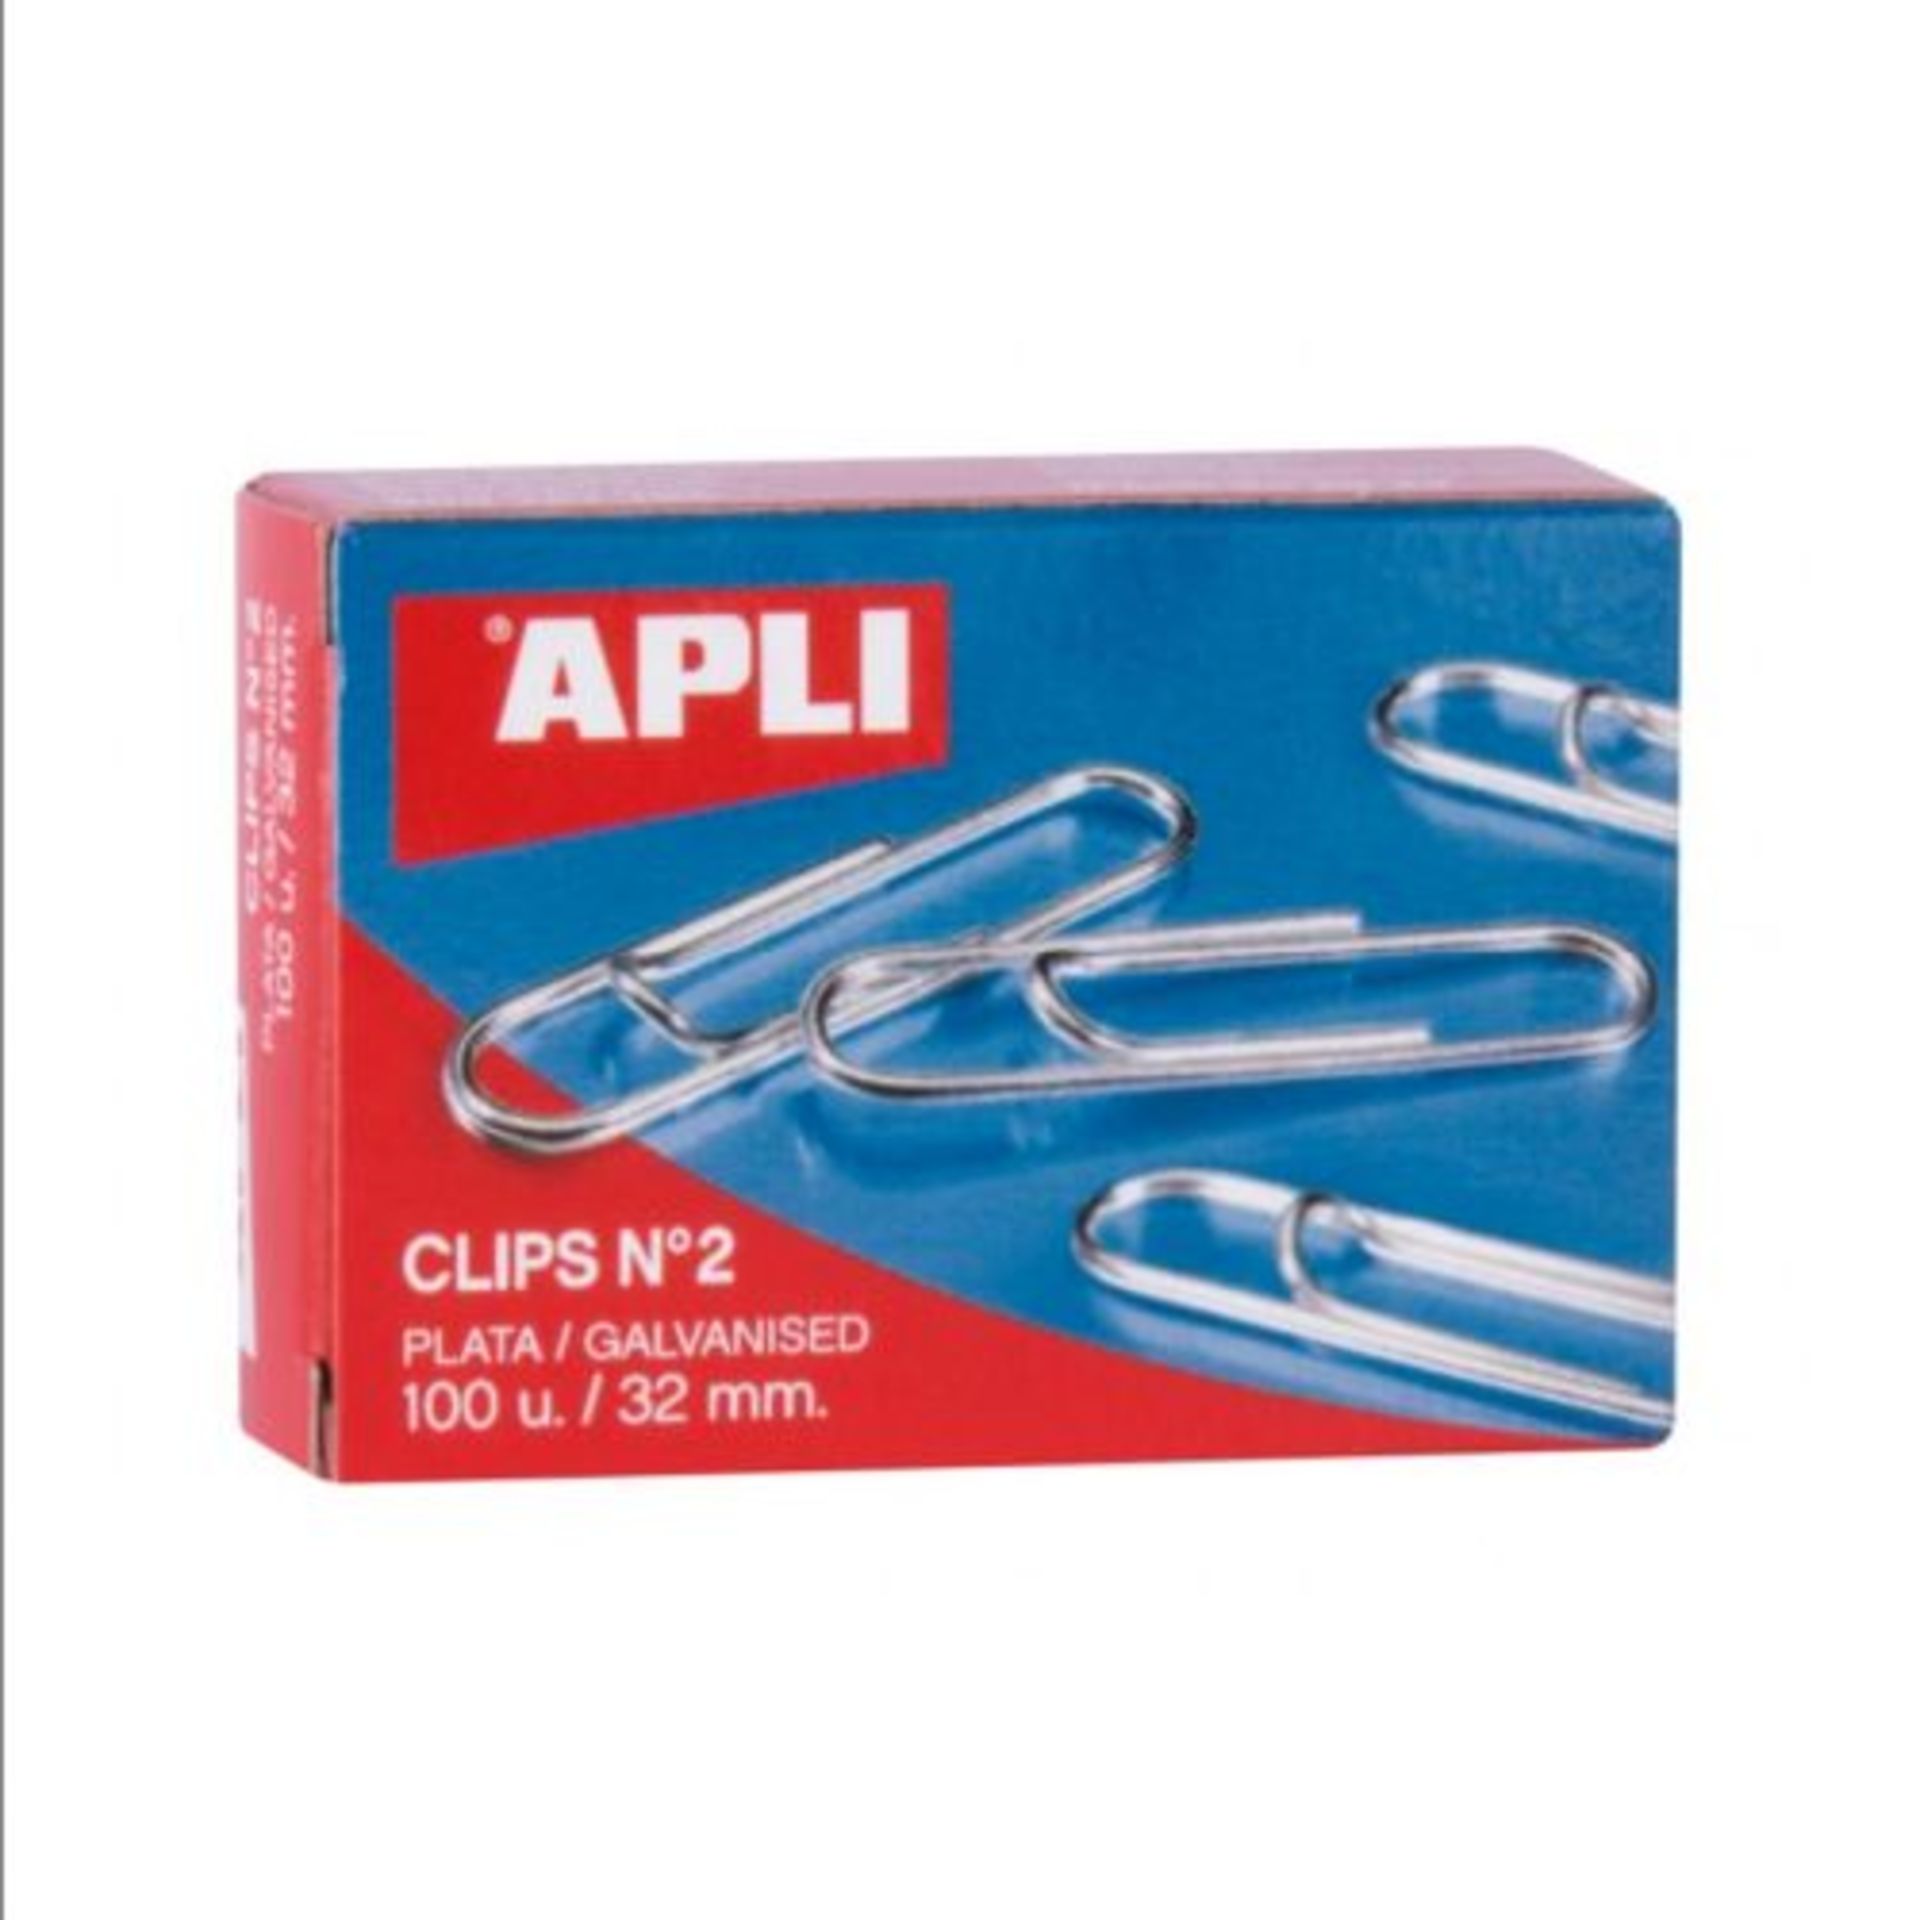 250 X Apli Paper - Box Clips Nickel-Plated N2 32mm Pack Of 100 - Image 2 of 2